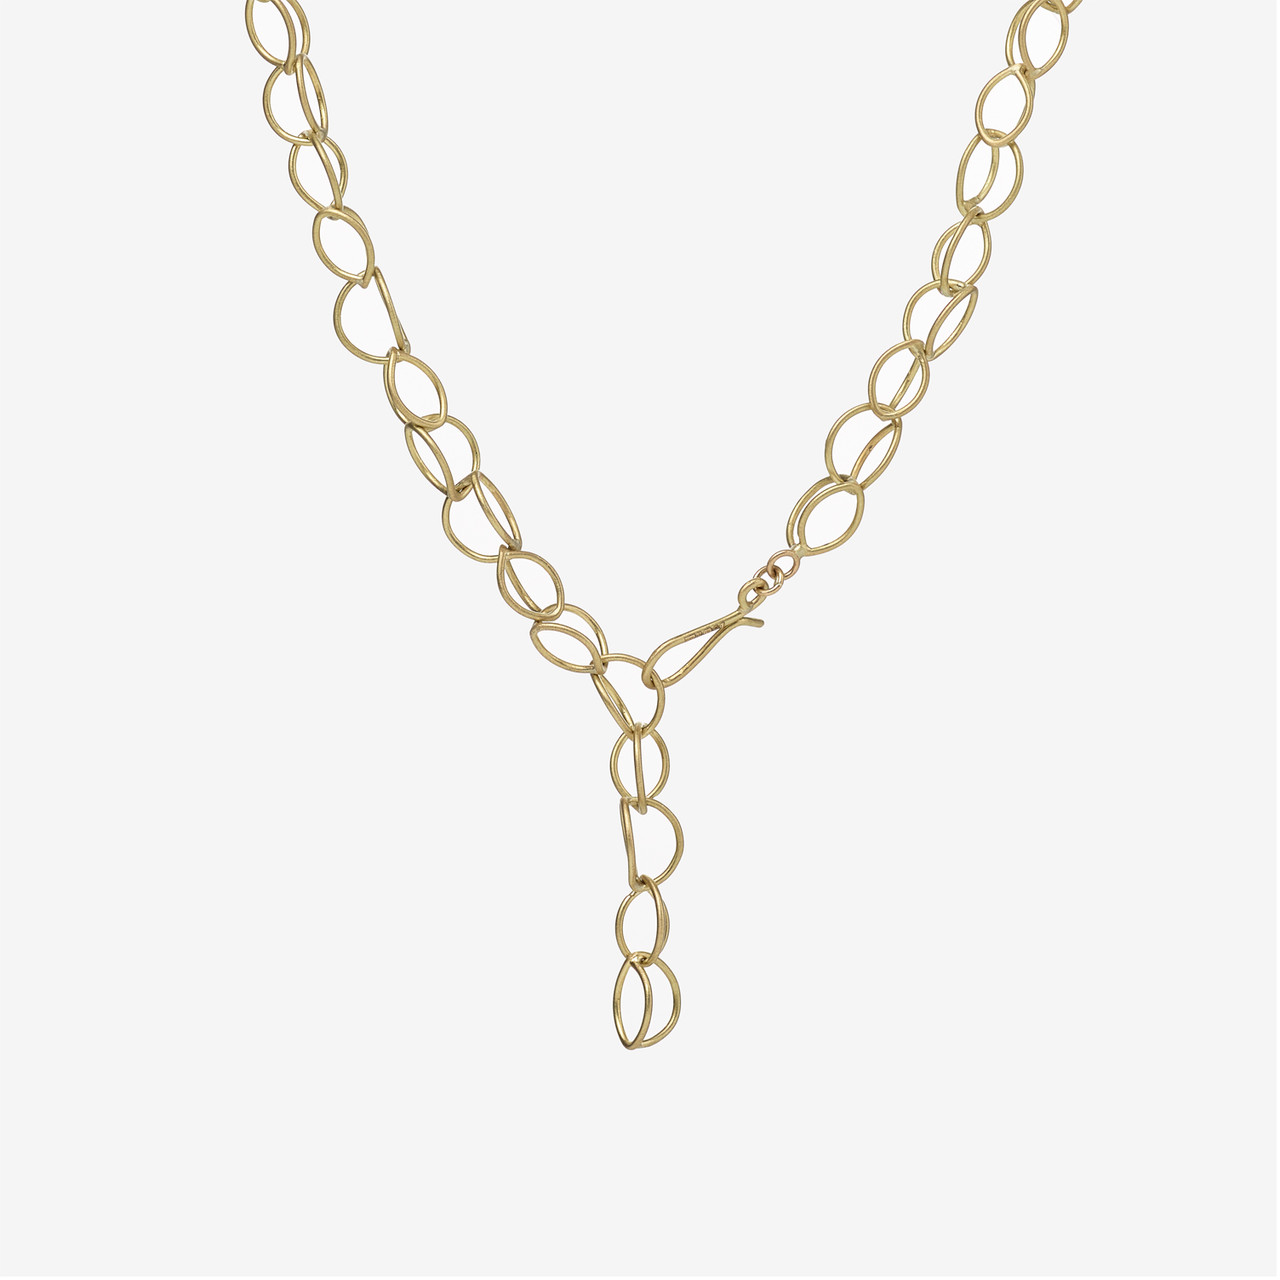 Gold Lily Chain Link Necklace, Sarah Straussberg, tomfoolery